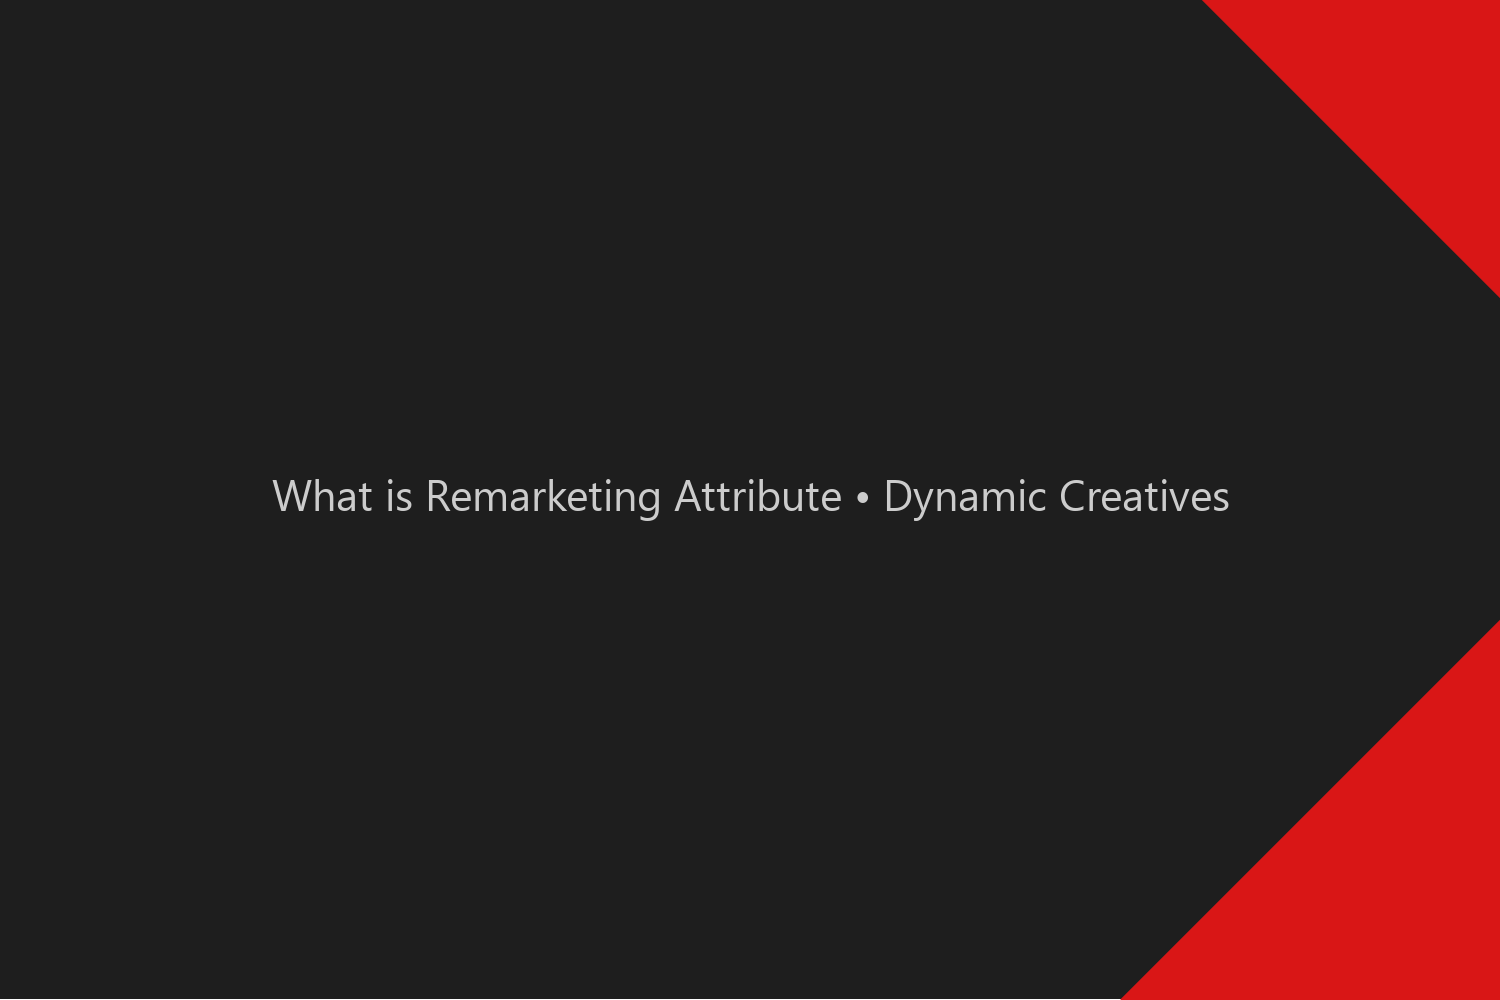 What is Remarketing Attribute • Dynamic Creatives